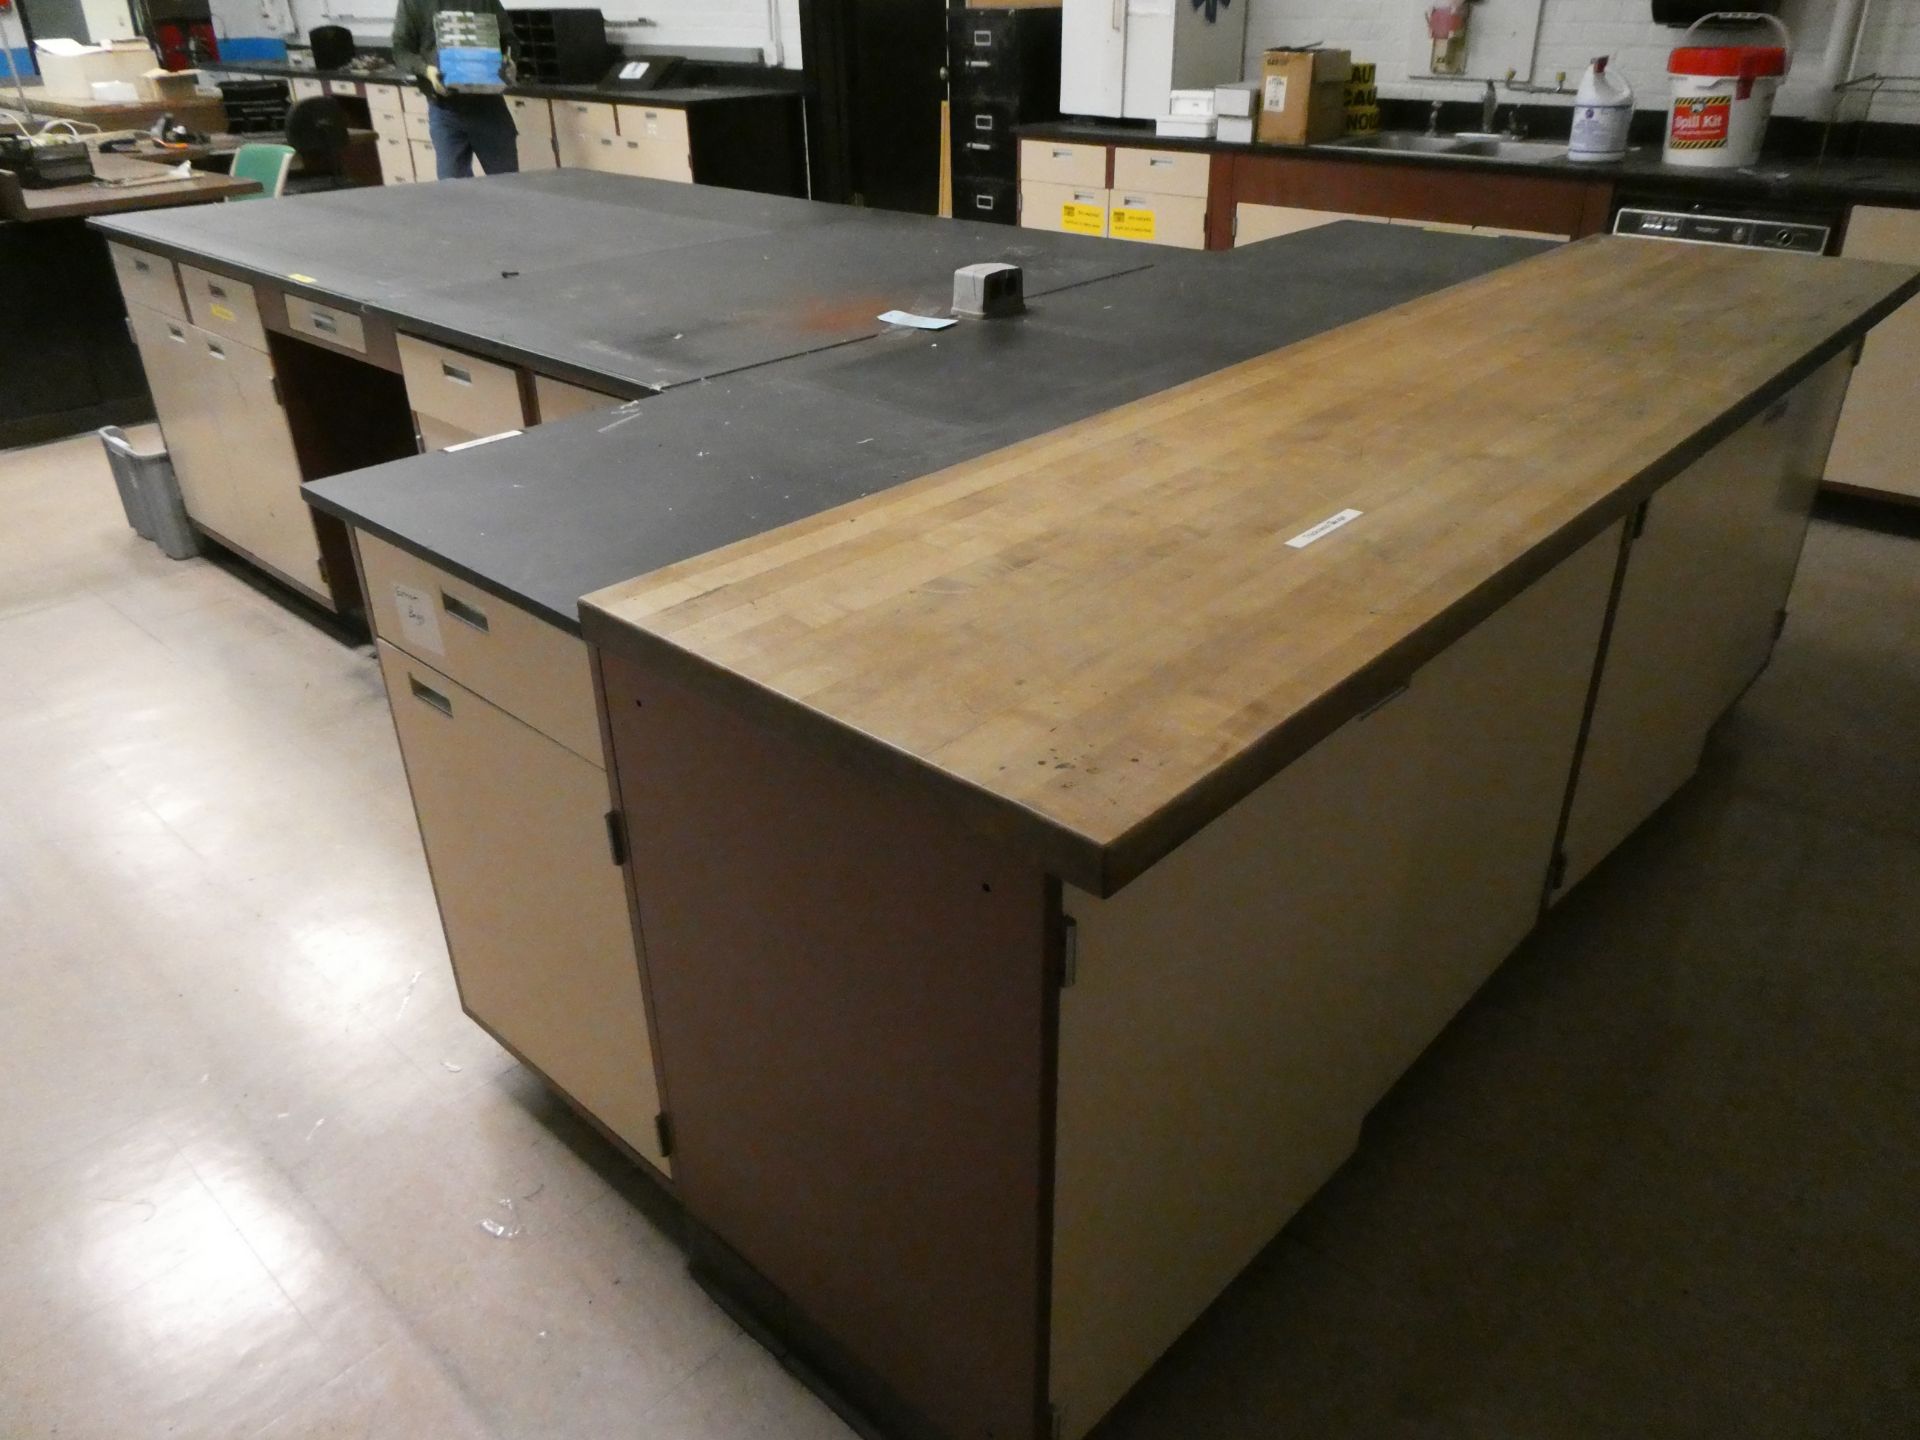 T Shaped Lab Cabinets w/Solid Work Surface - Image 3 of 4